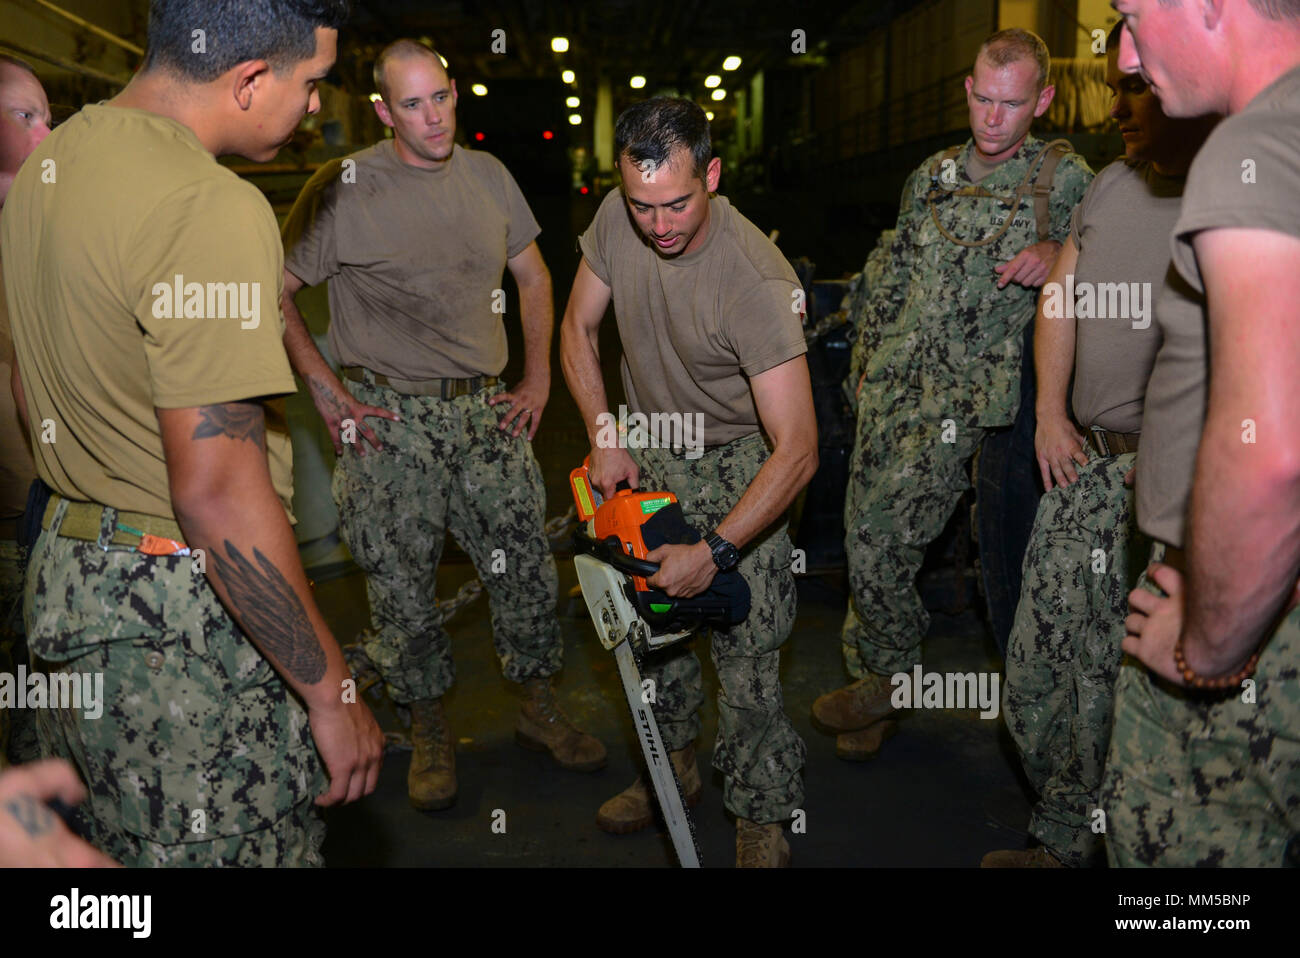 ATLANTIC OCEAN (Sept. 9, 2017) Equipment Operator 2nd Class Christopher Fleming, assigned to Assault Craft Unit (ACU) 2, gives training on chainsaw maintenance in the well deck of the amphibious assault ship USS Iwo Jima (LHD 7) in preparation for potential humanitarian relief efforts. The preparations ensure Iwo Jima is ready to respond to any requests to bolster Northern Command’s support of the Federal Emergency Management Agency assistance to federal, state and local authorities’ ongoing relief efforts in the aftermath of Hurricane Irma. (U.S. Navy photo by Mass Communication Specialist 3r Stock Photo